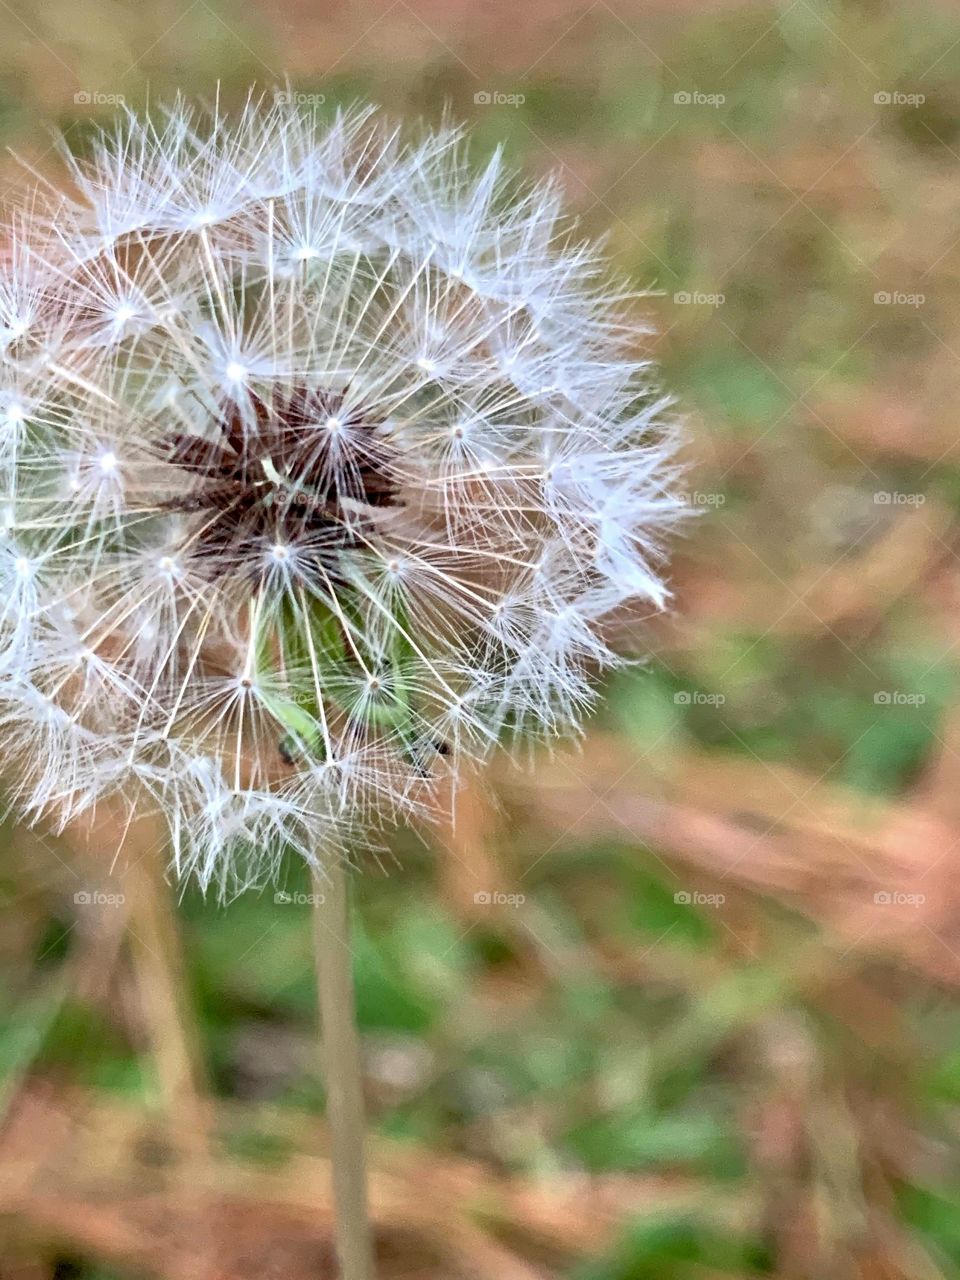 Closeup of a full, delicate dandelion with grass and pine needles blurred in the background.